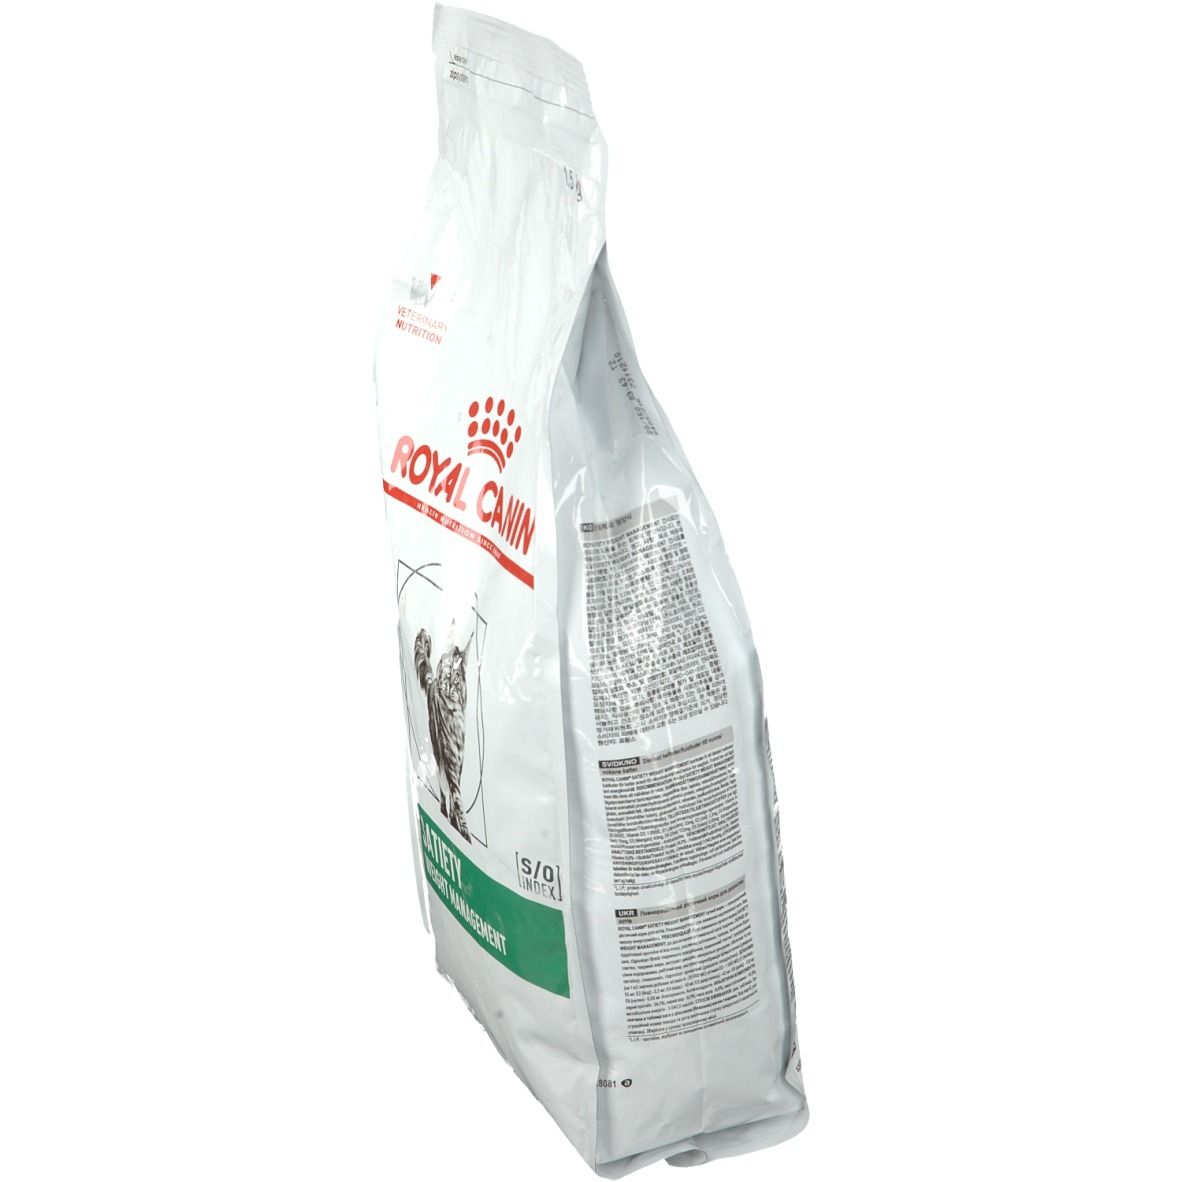 ROYAL CANIN Veterinary Satiety Weight Management